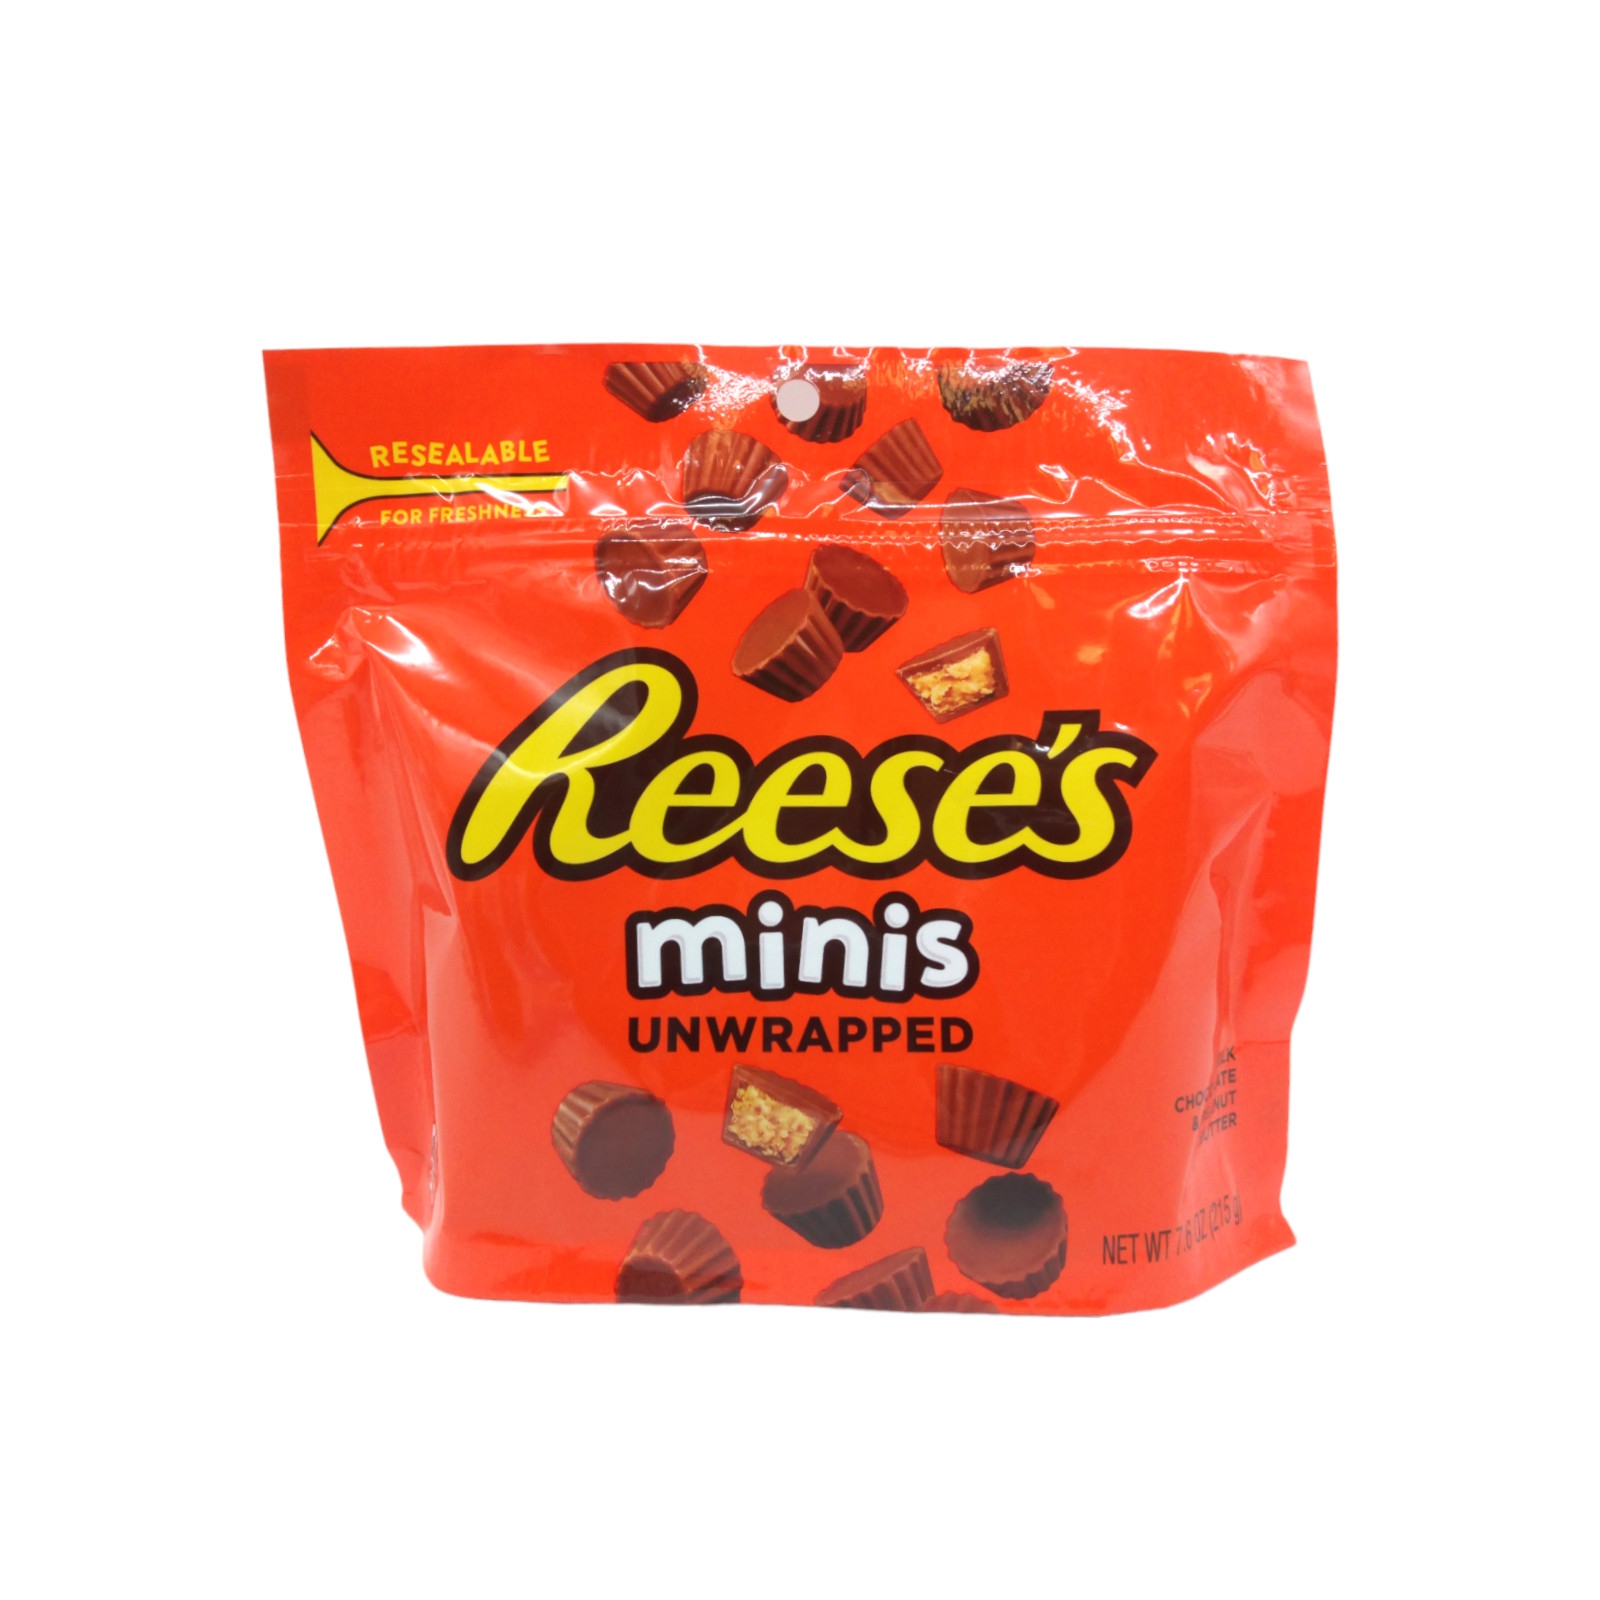 Reeses minis unwrapped 215g